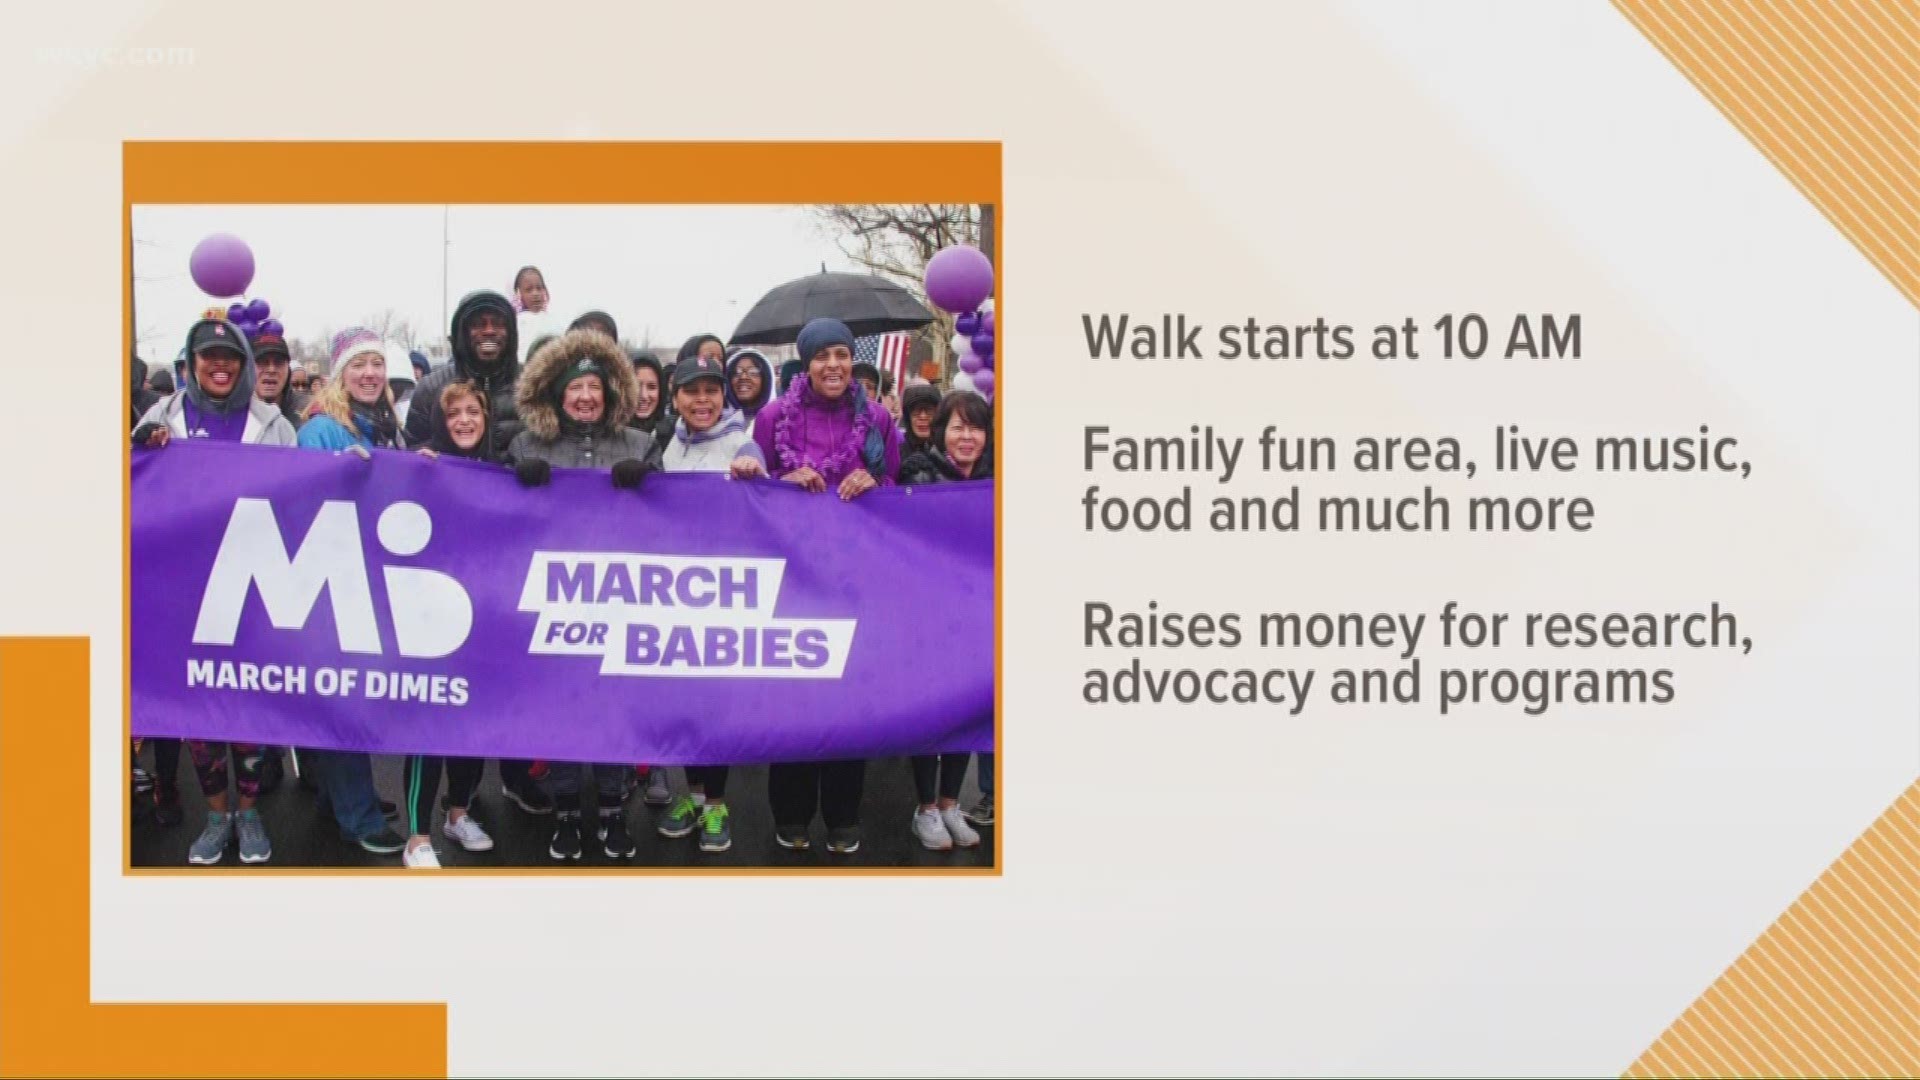 Lindsay gives us a glimpse at the March for Babies with Erin Turner of the March of Dimes.